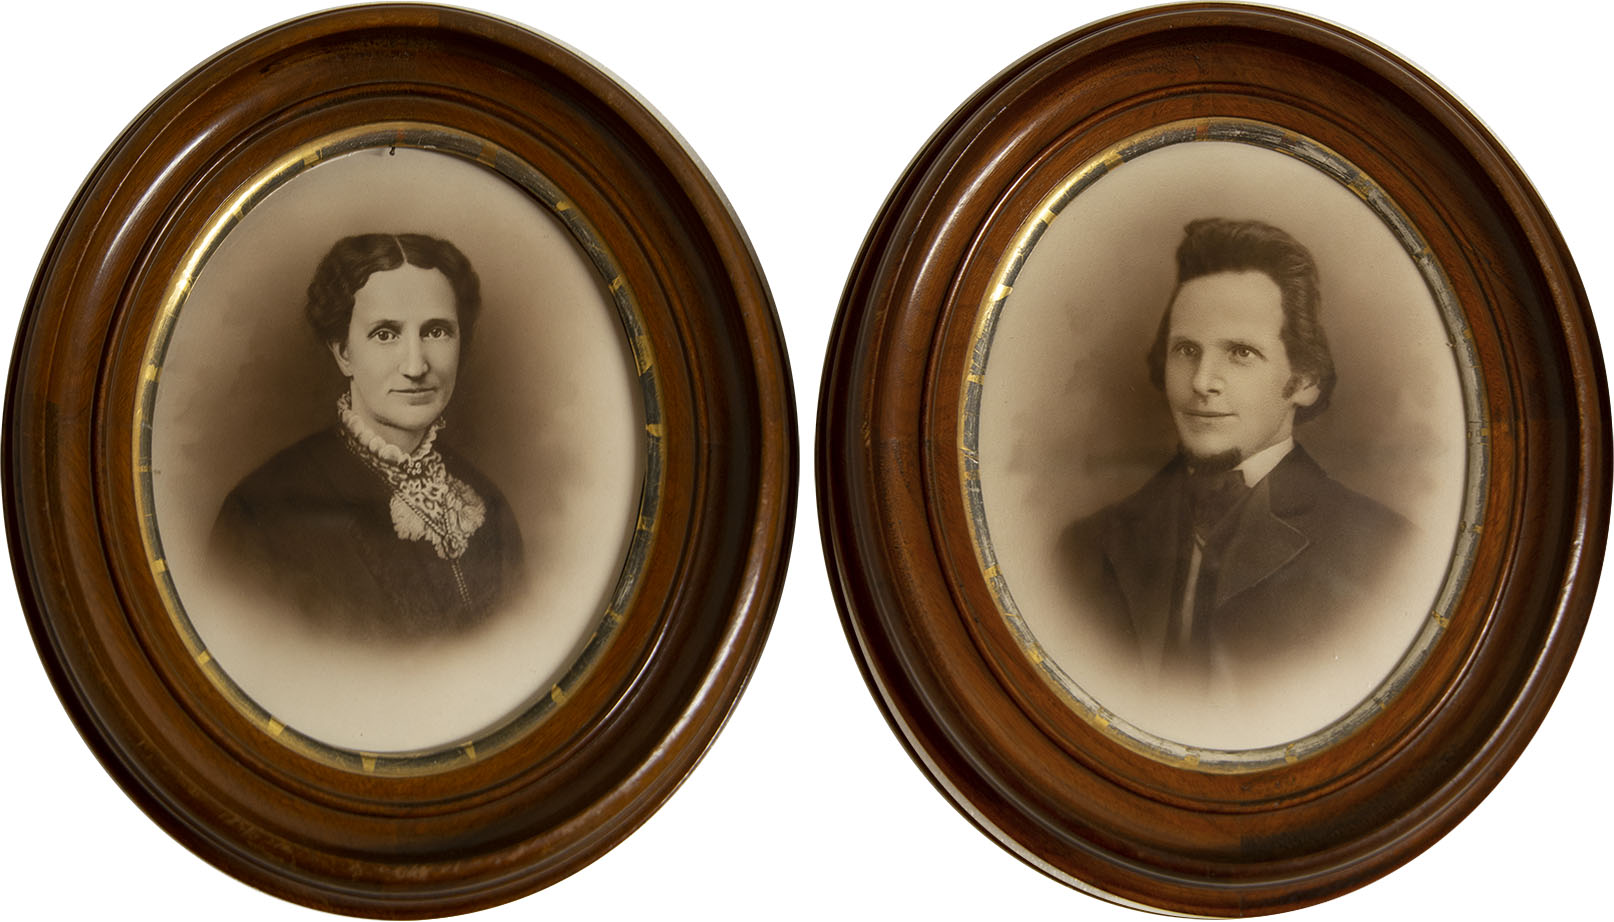 Chalk drawings of Asa Eddy and Mary Baker Eddy, side by side, c. 1880s